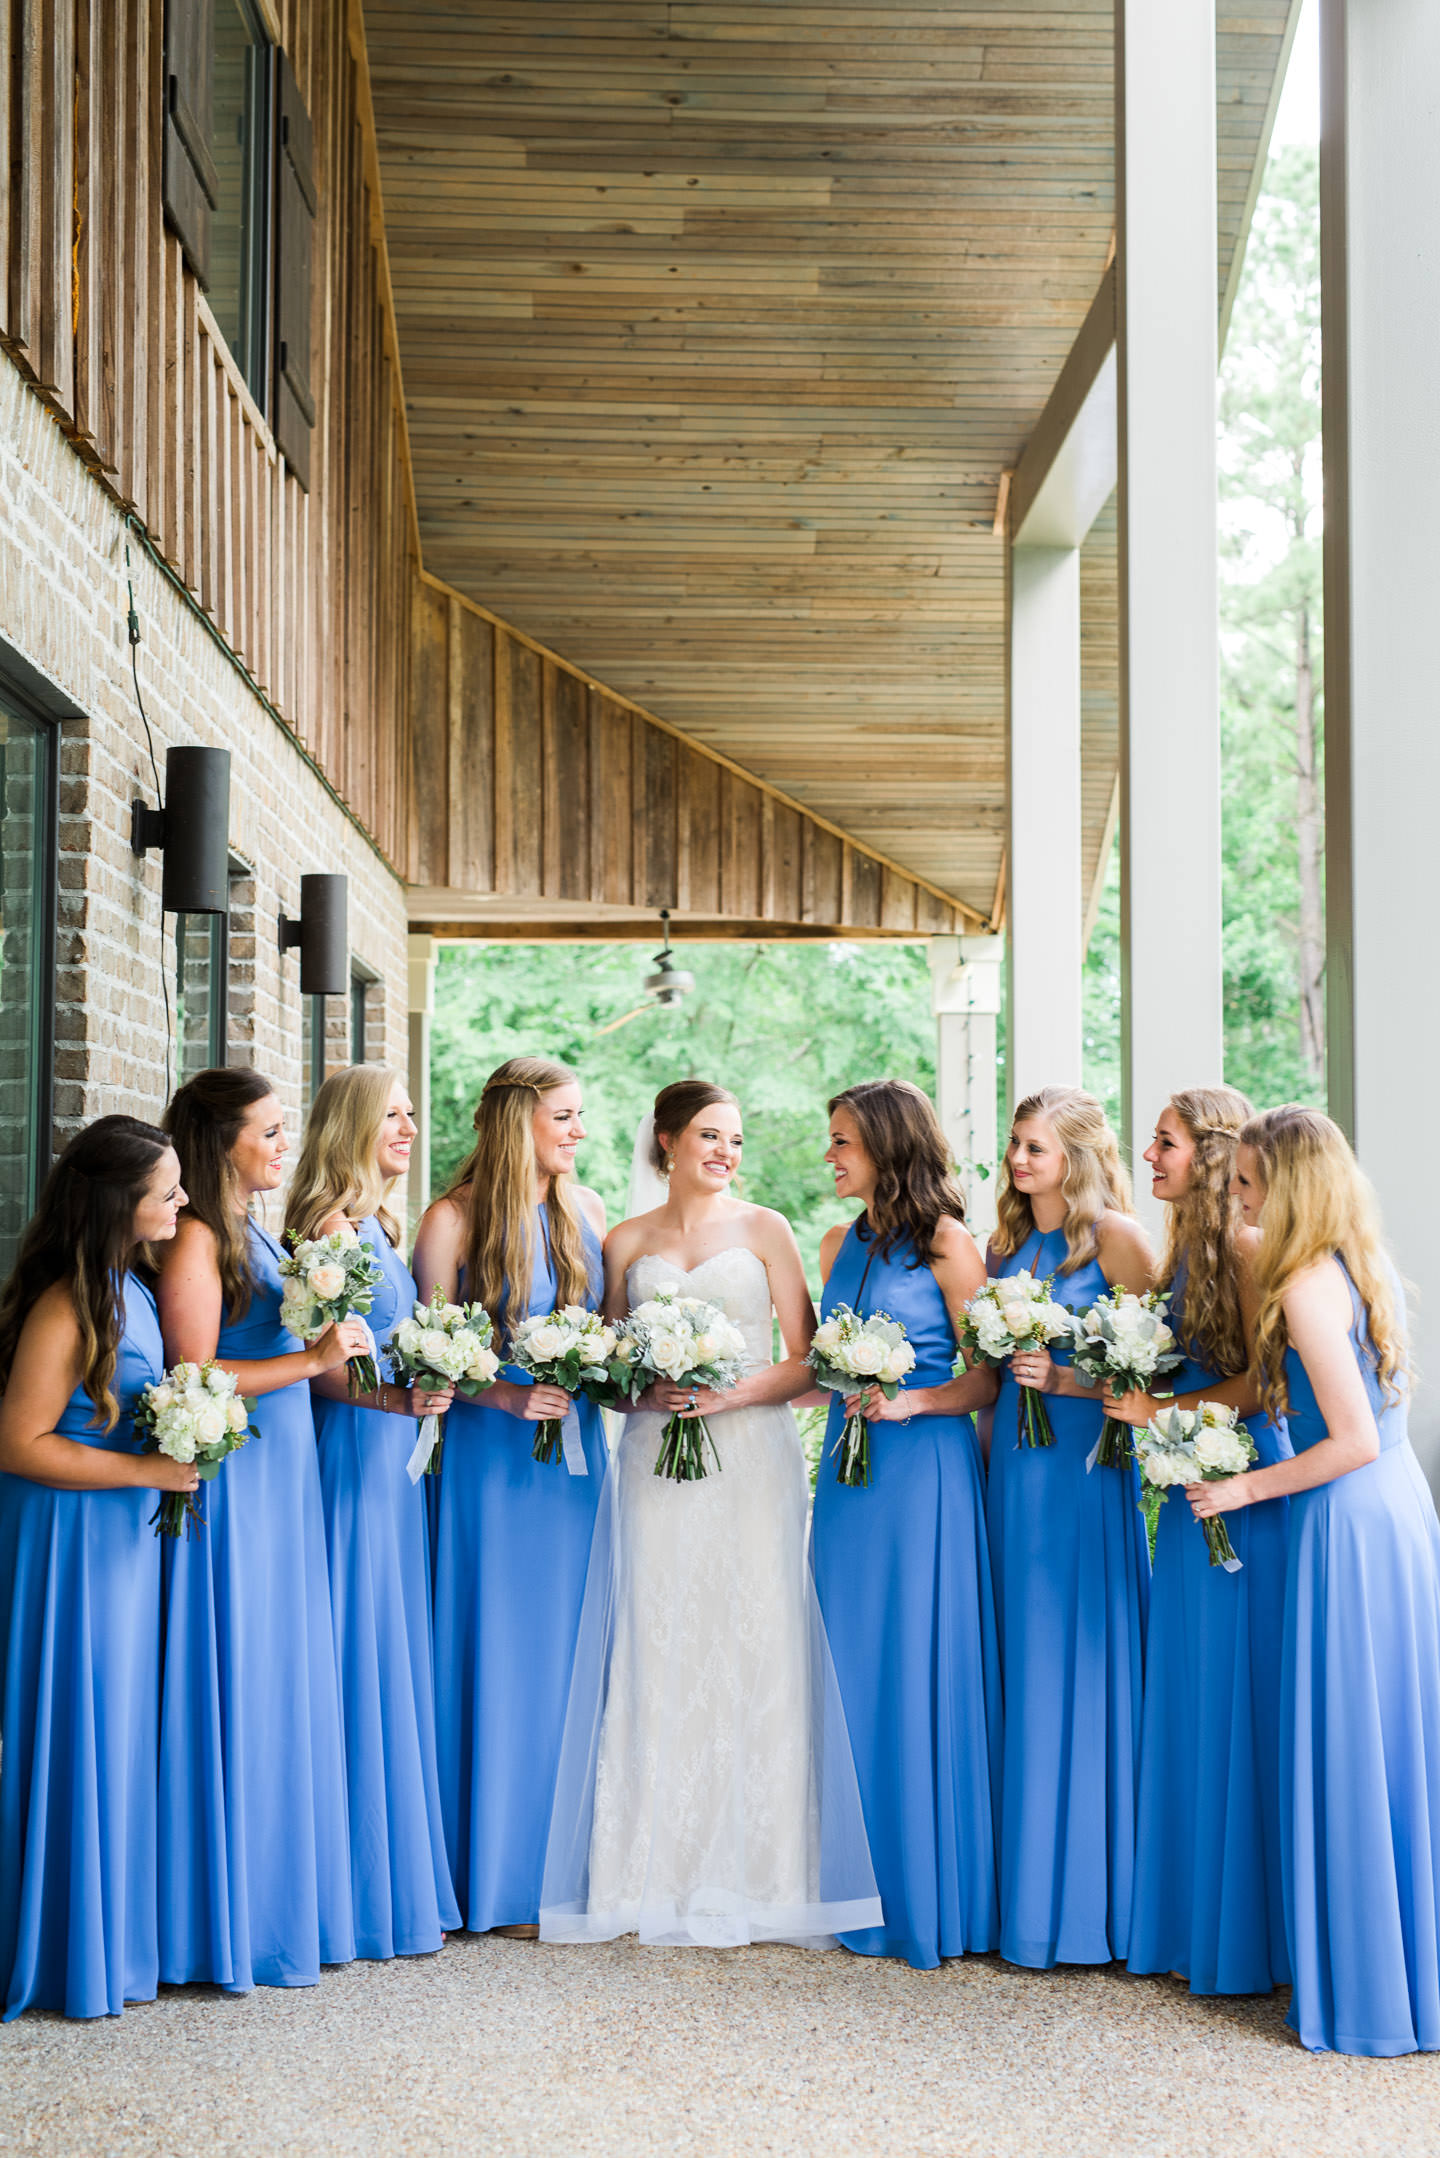 Mississippi bride and bridesmaids smiling at each other in blue long dresses and floral bouquets during their Southern wedding